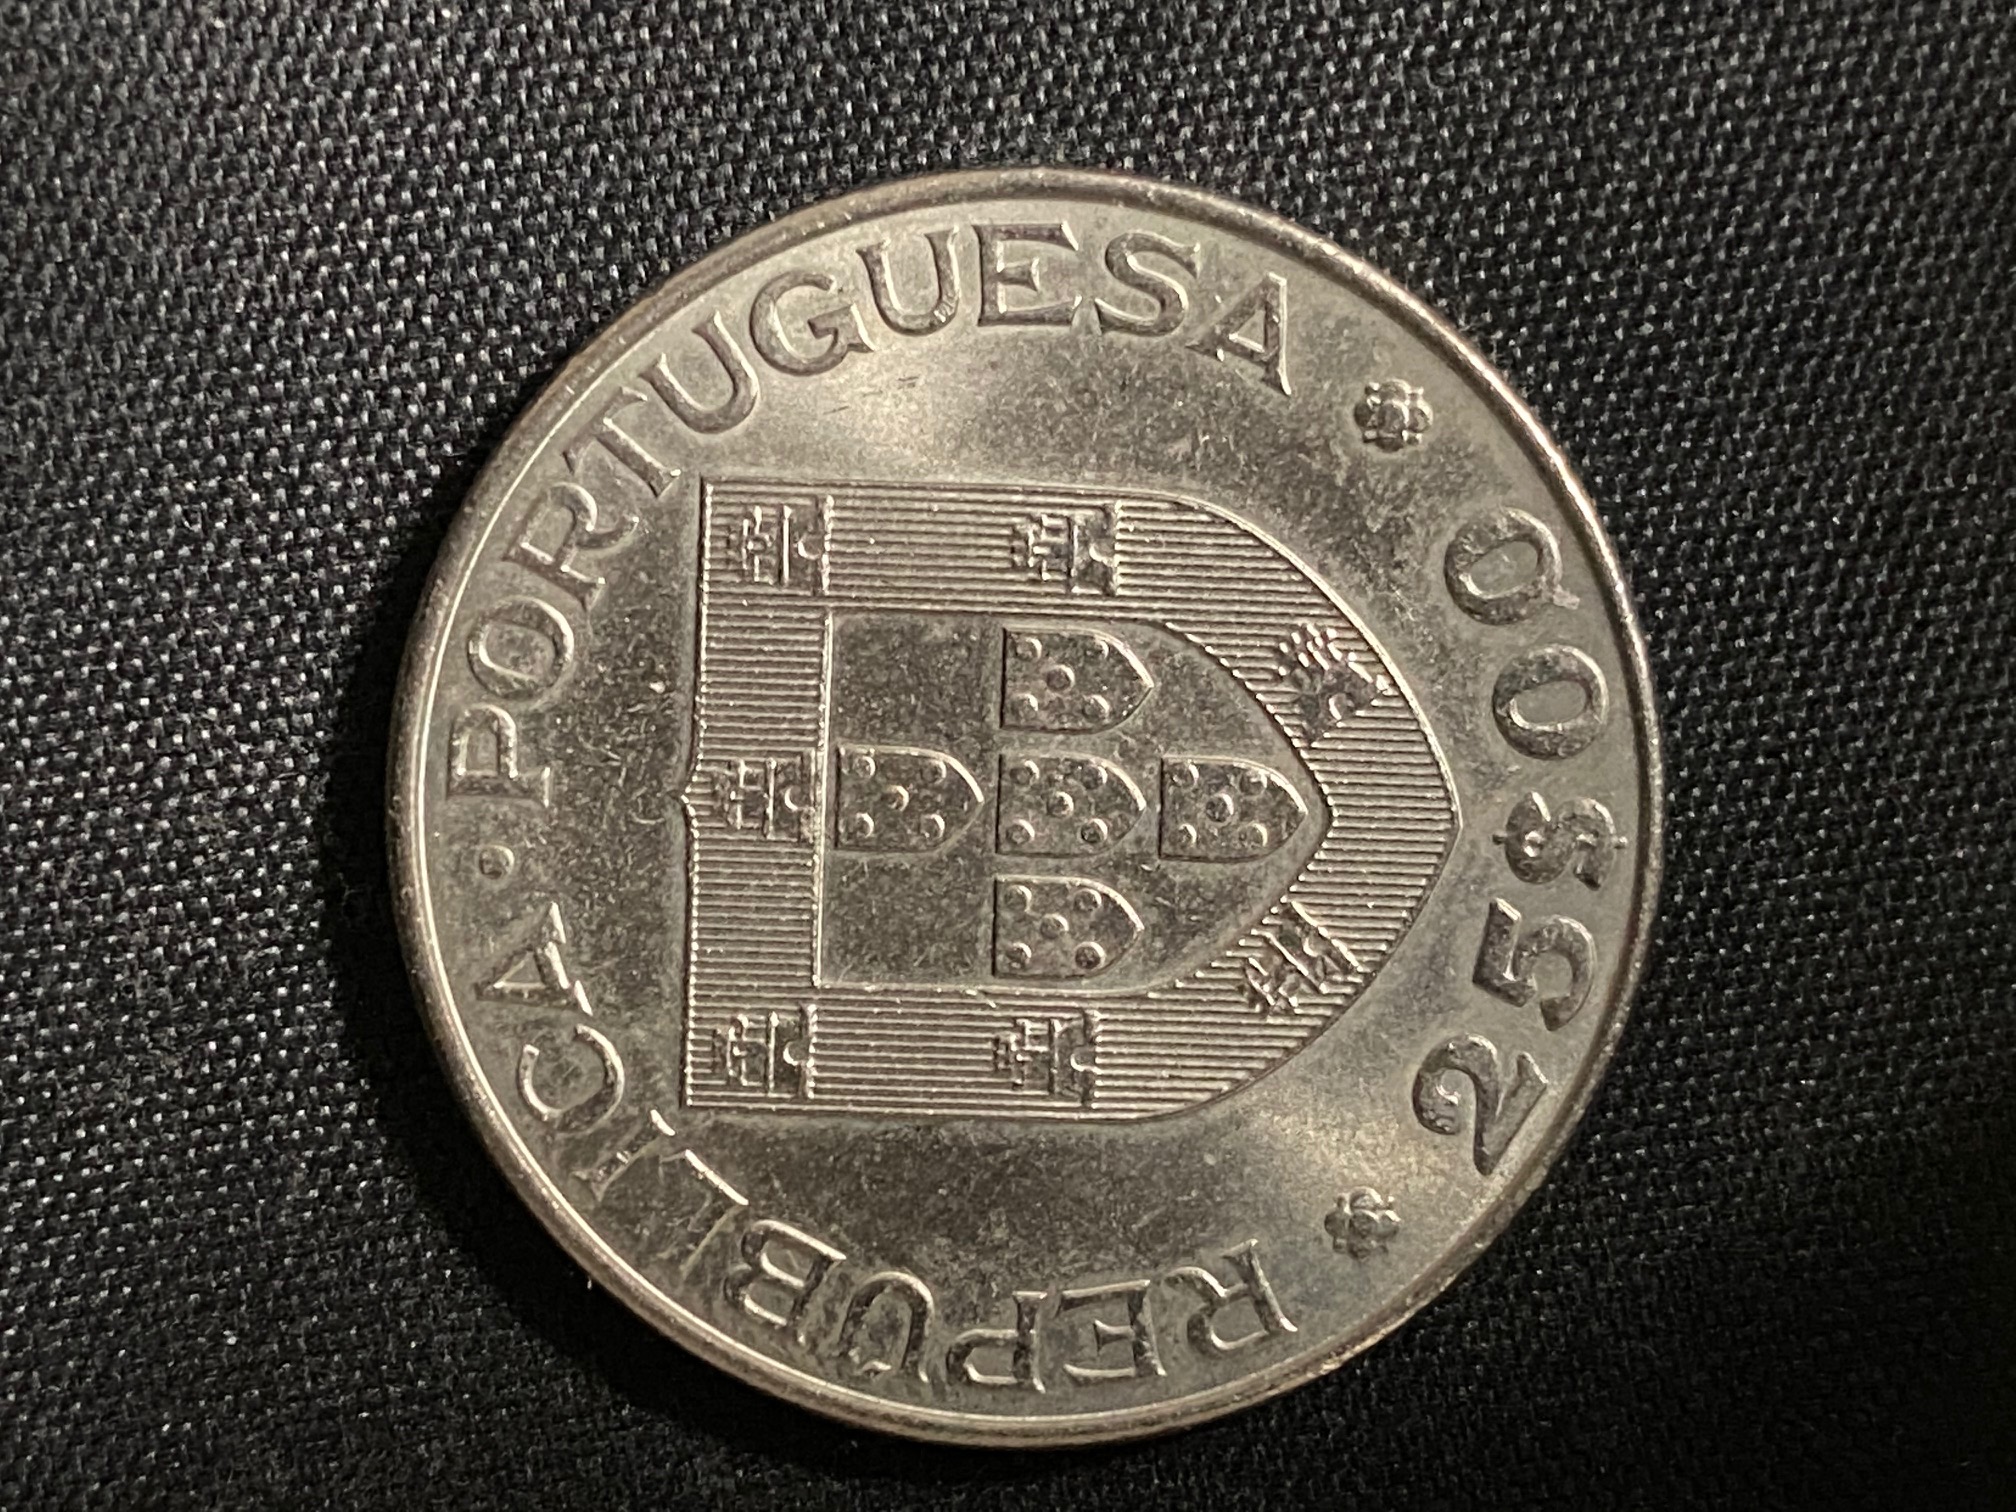 IYDP coins of Portugal